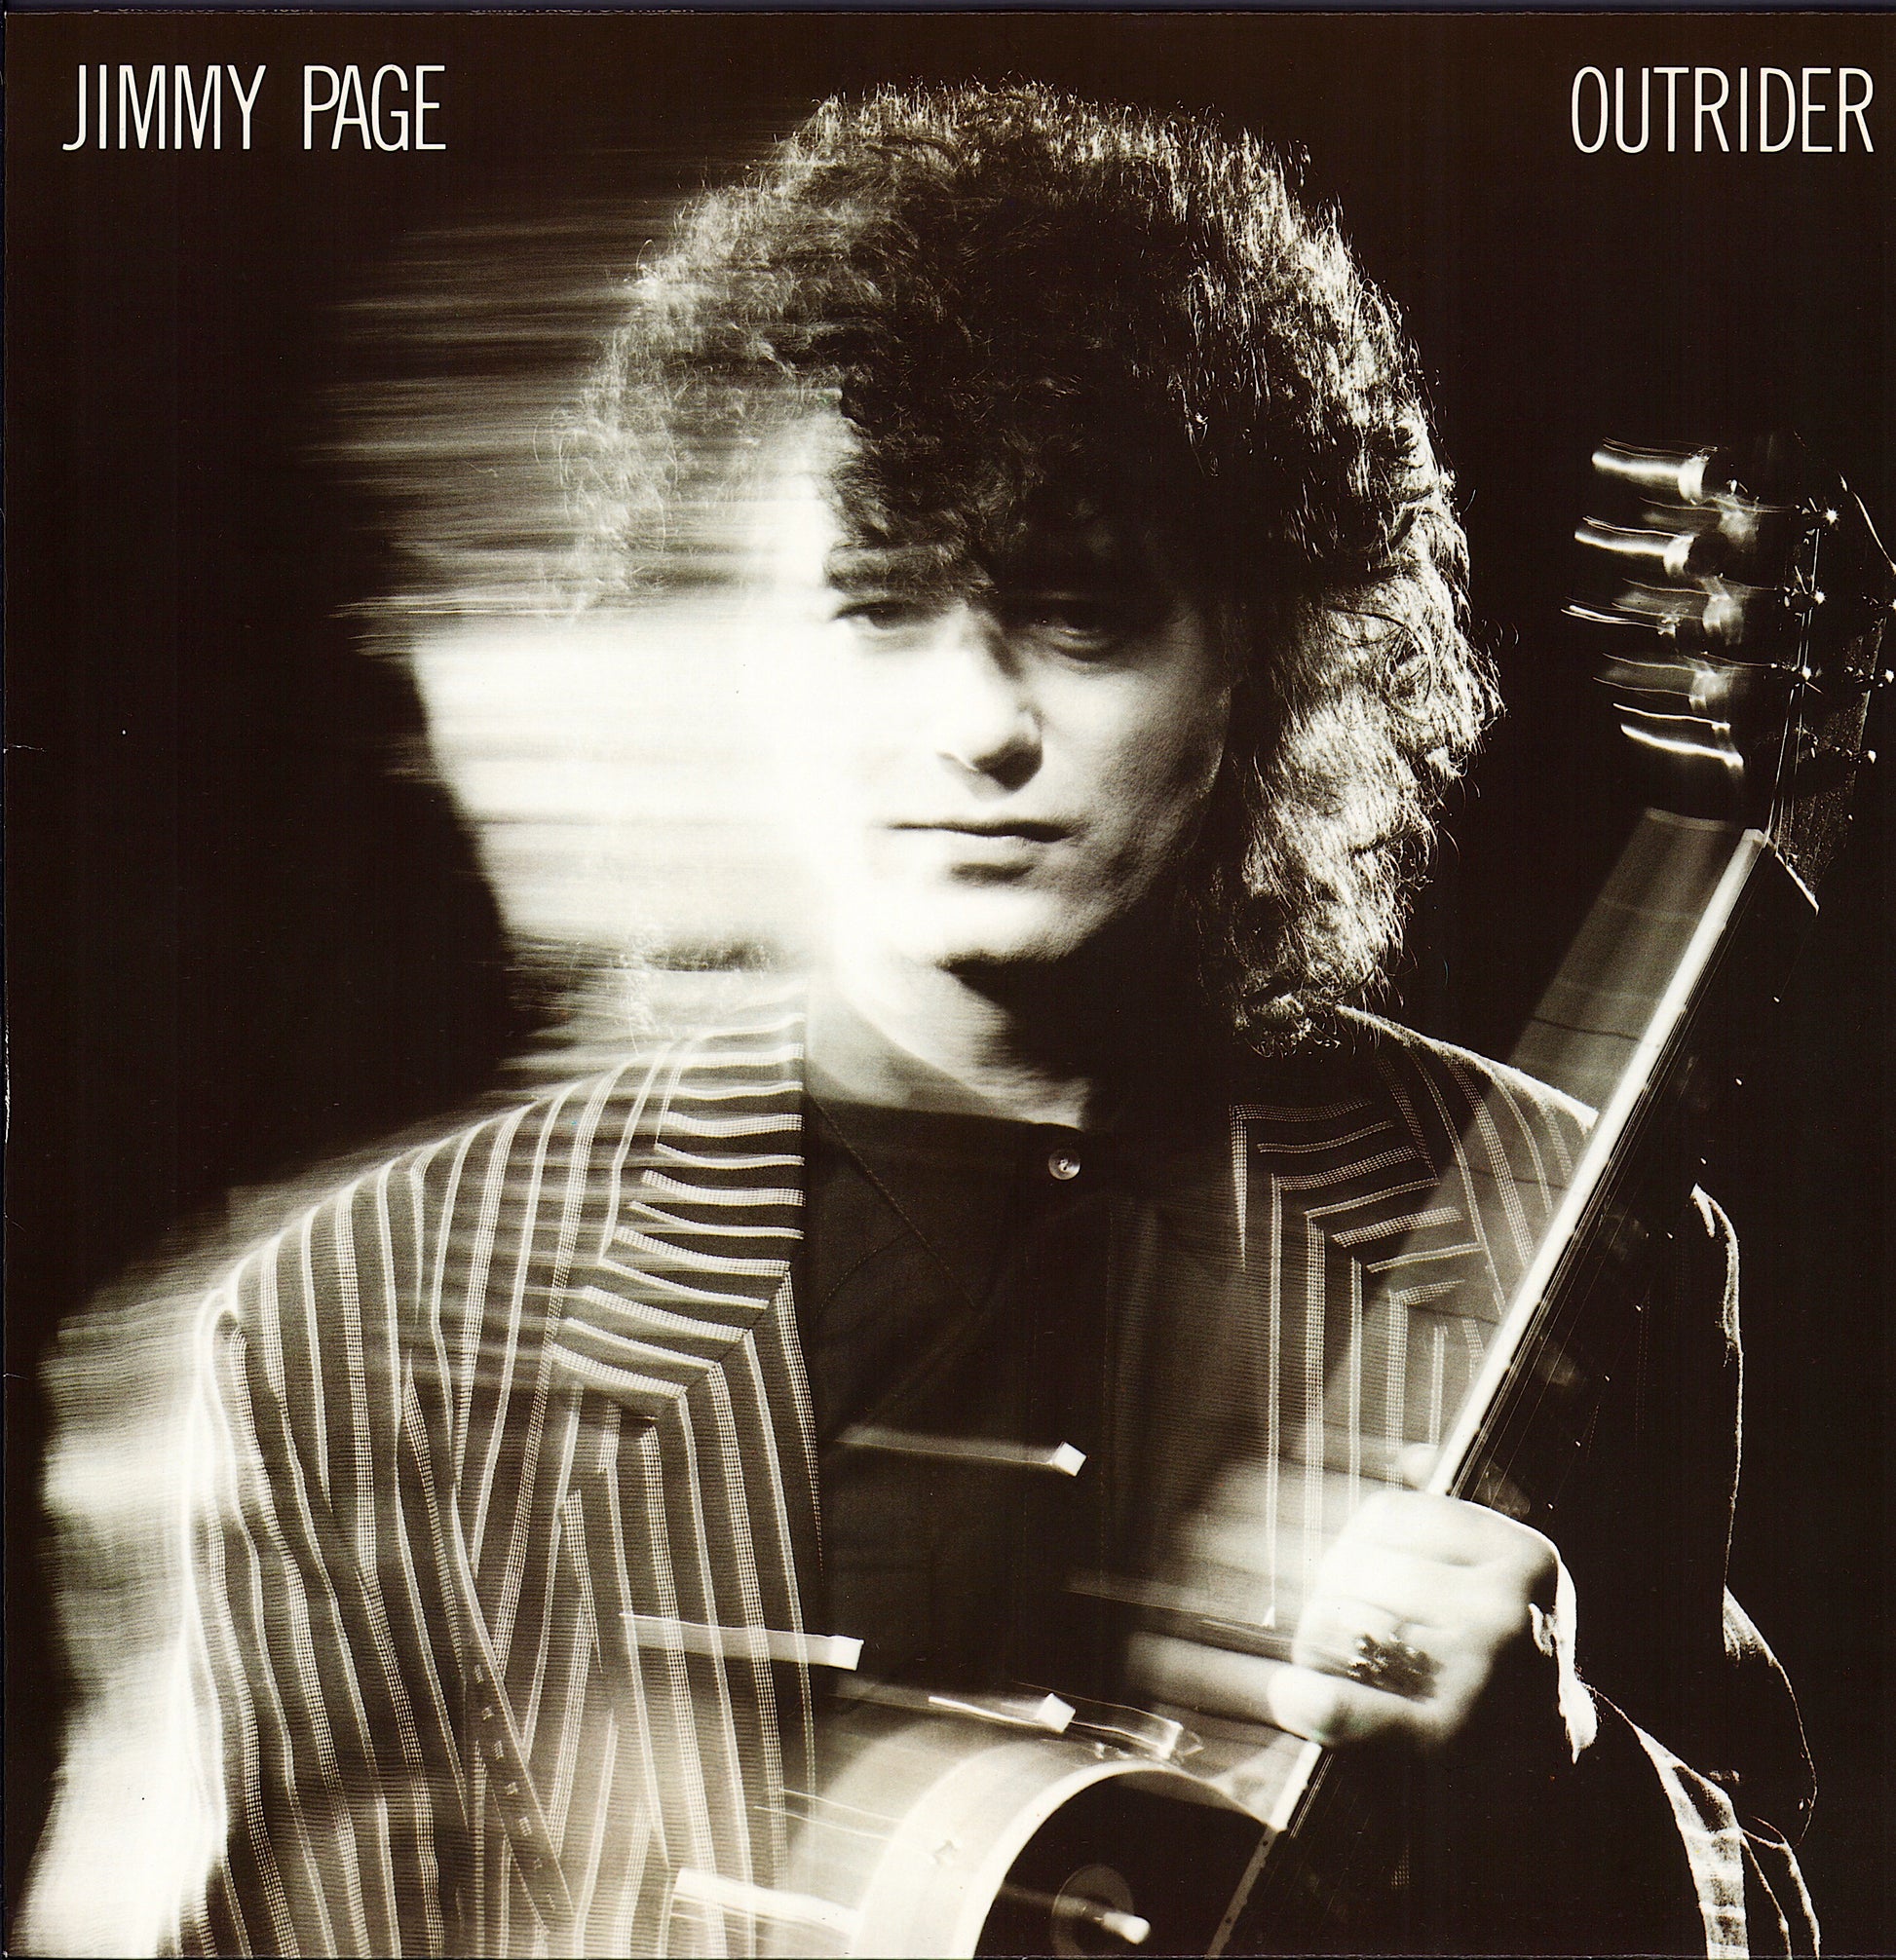 Jimmy Page - Outrider Vinyl LP